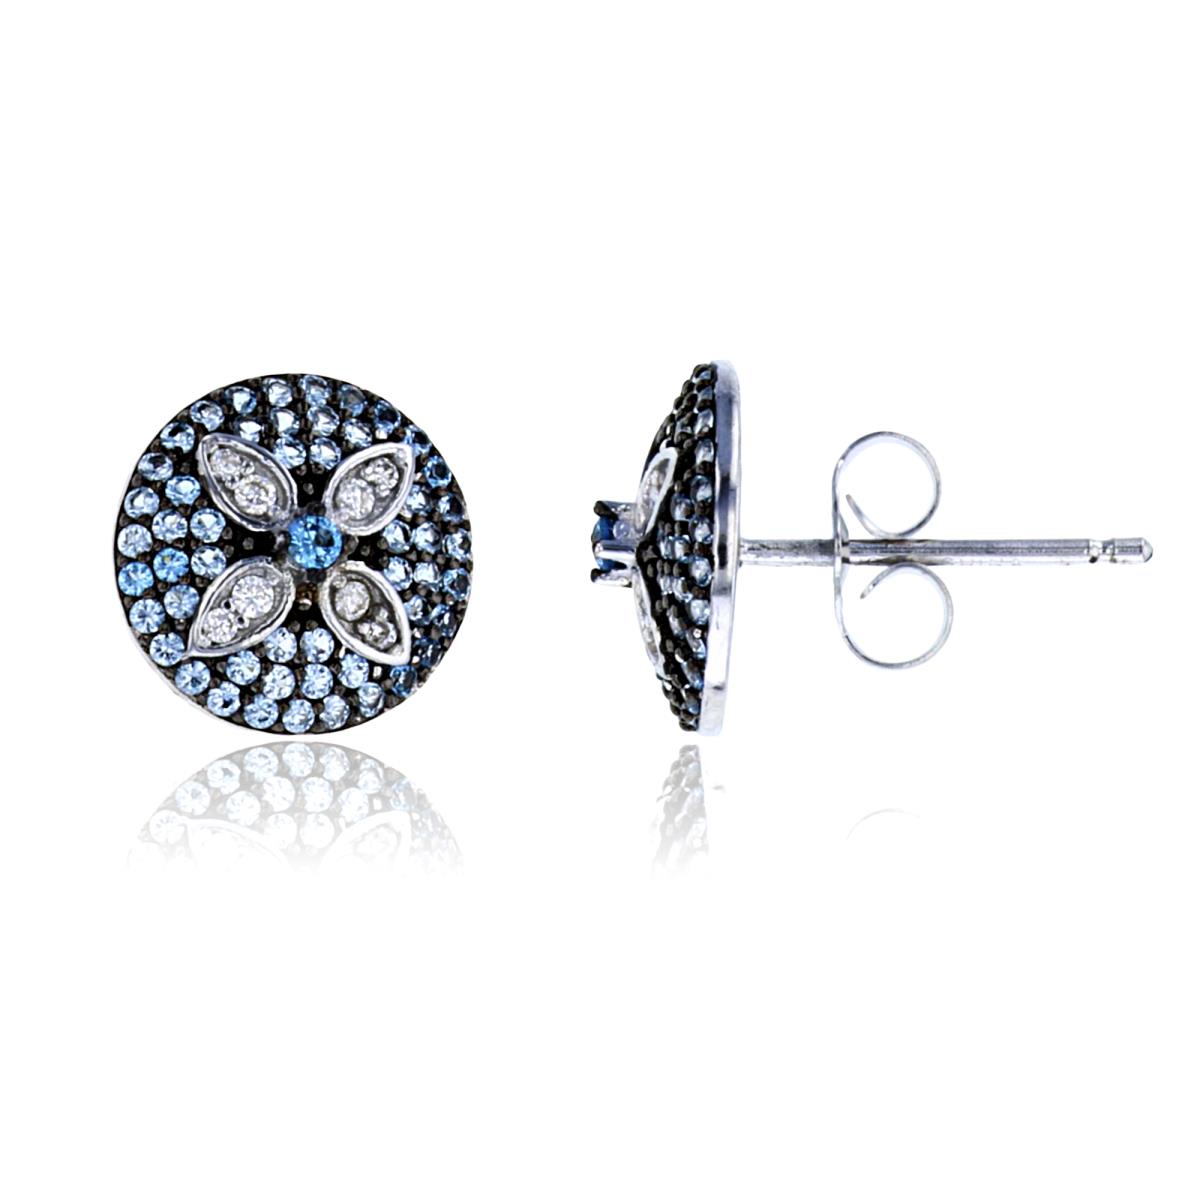 Sterling Silver Two-Tone Rnd White & #119 Blue CZ Pave Flower on Rnd Studs